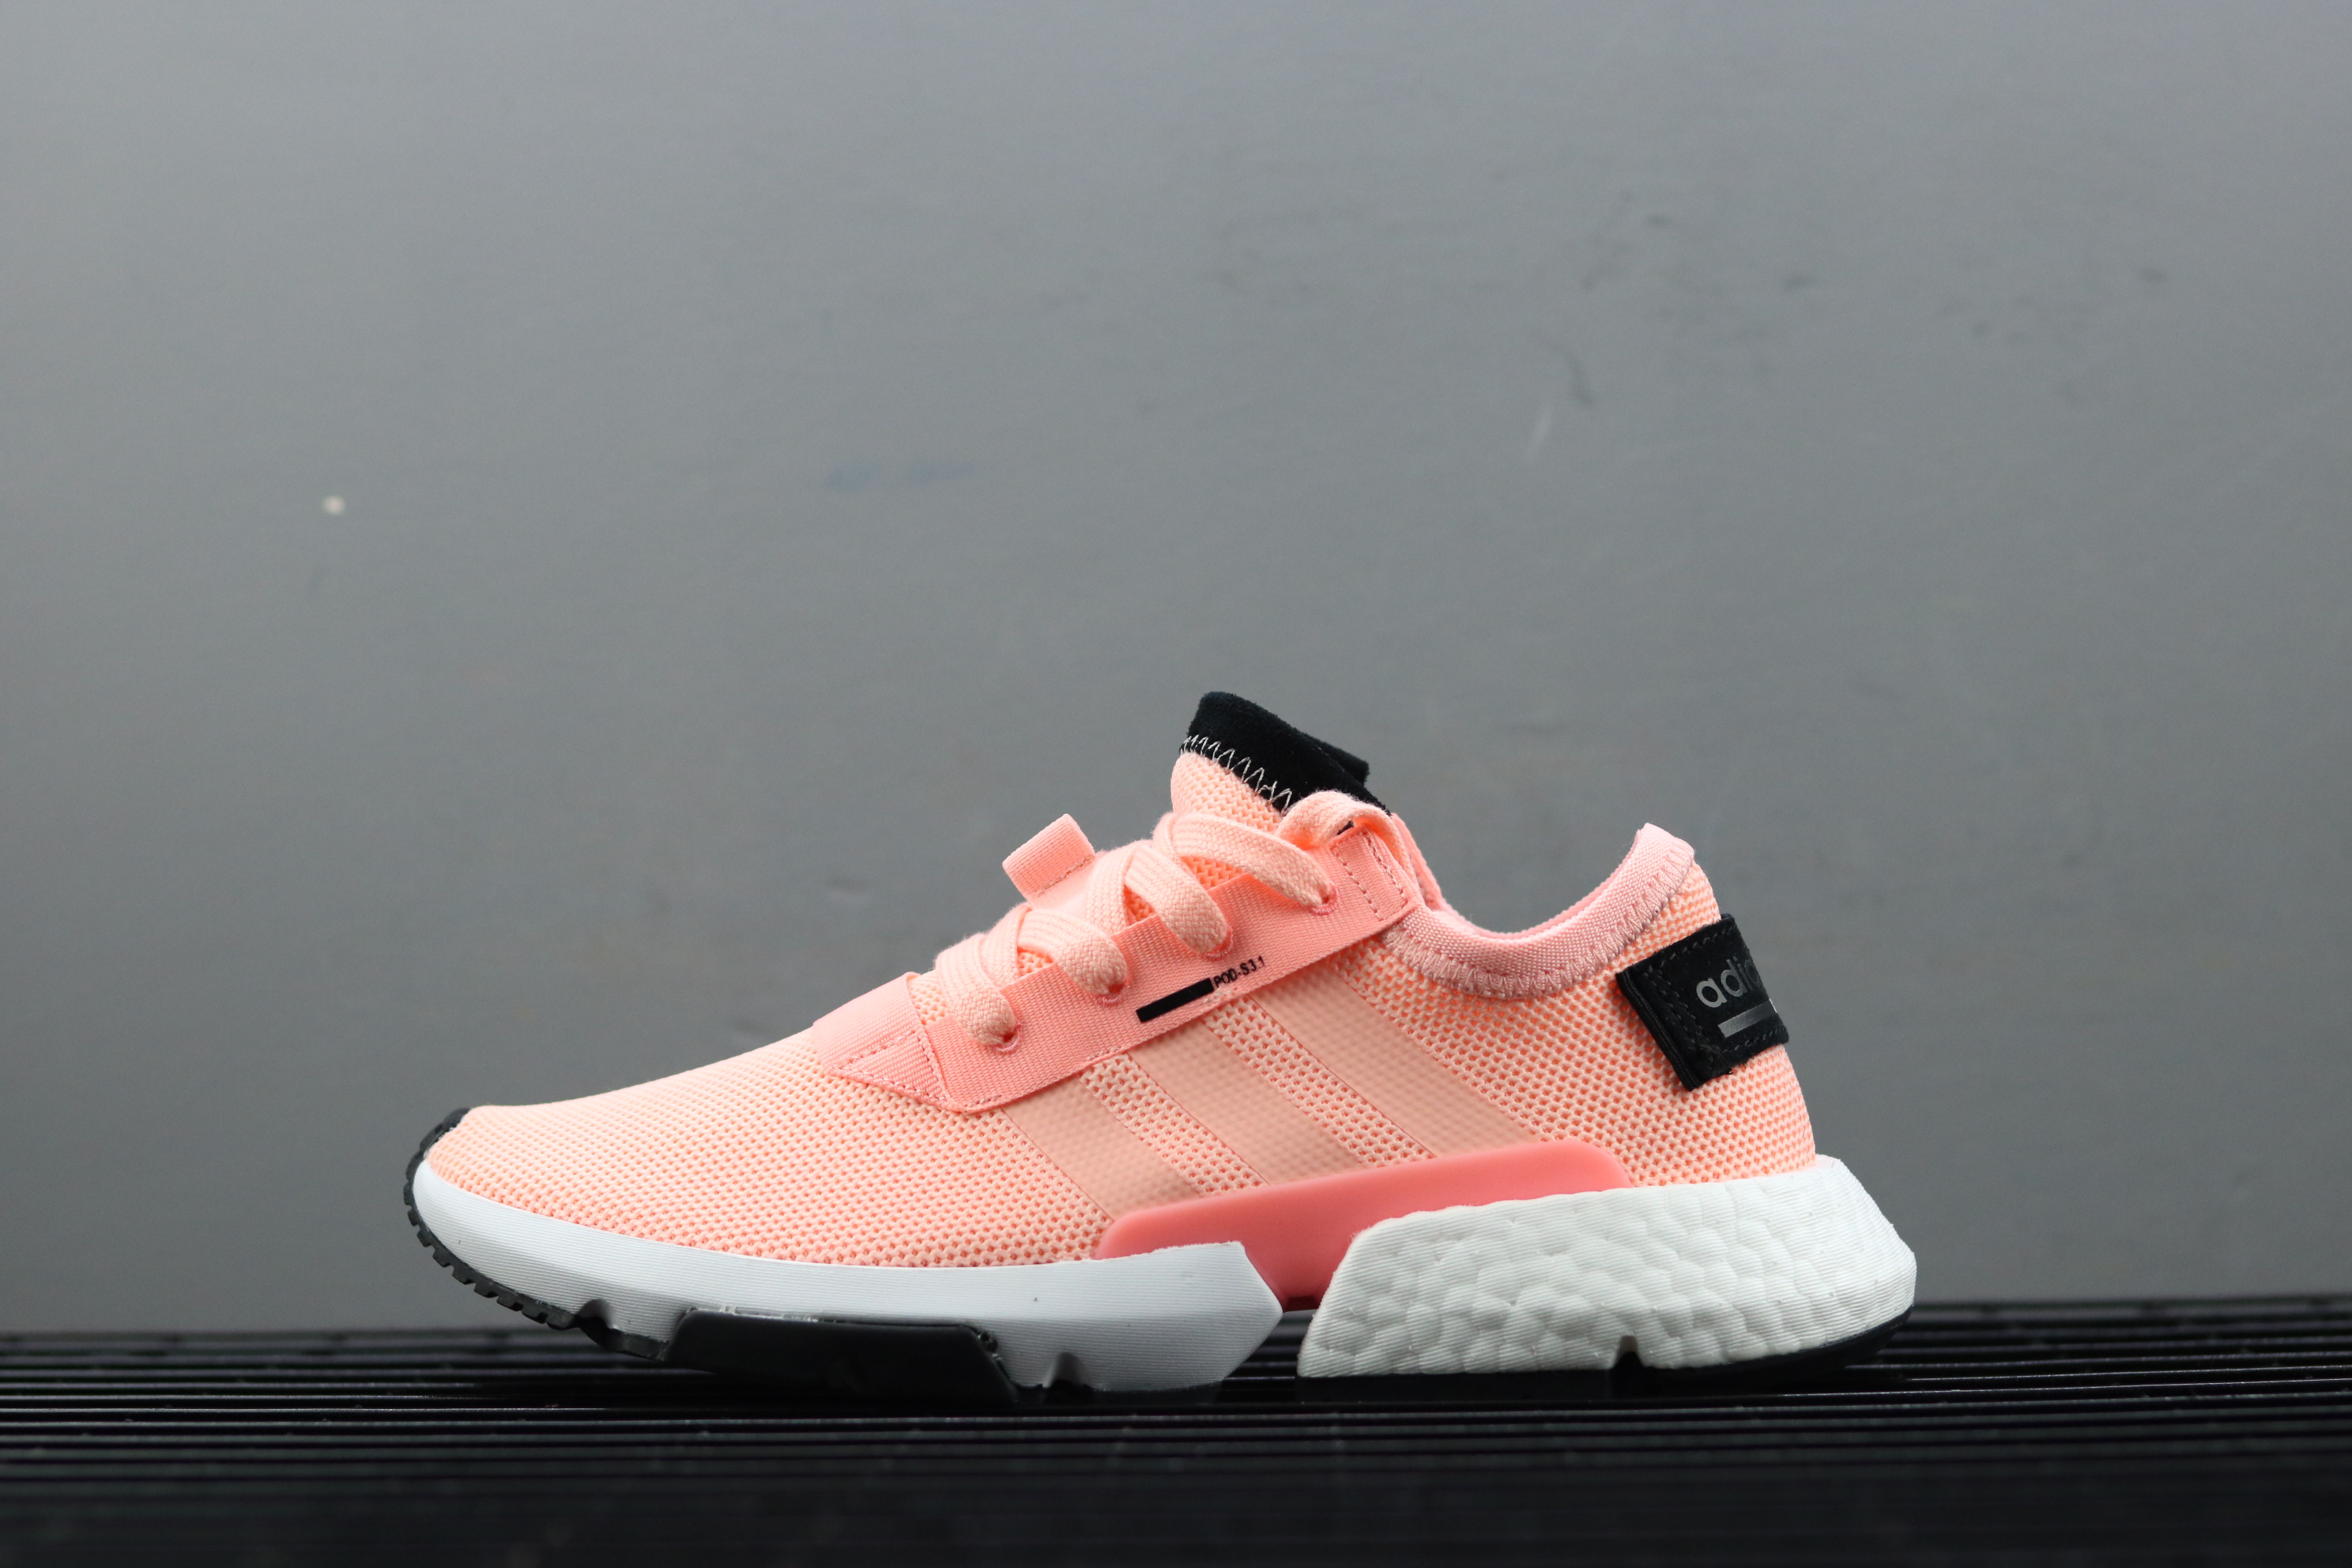 lose yourself Refinement defense adidas Originals P.O.D.-S3.1 Pink For Sale – The Sole Line